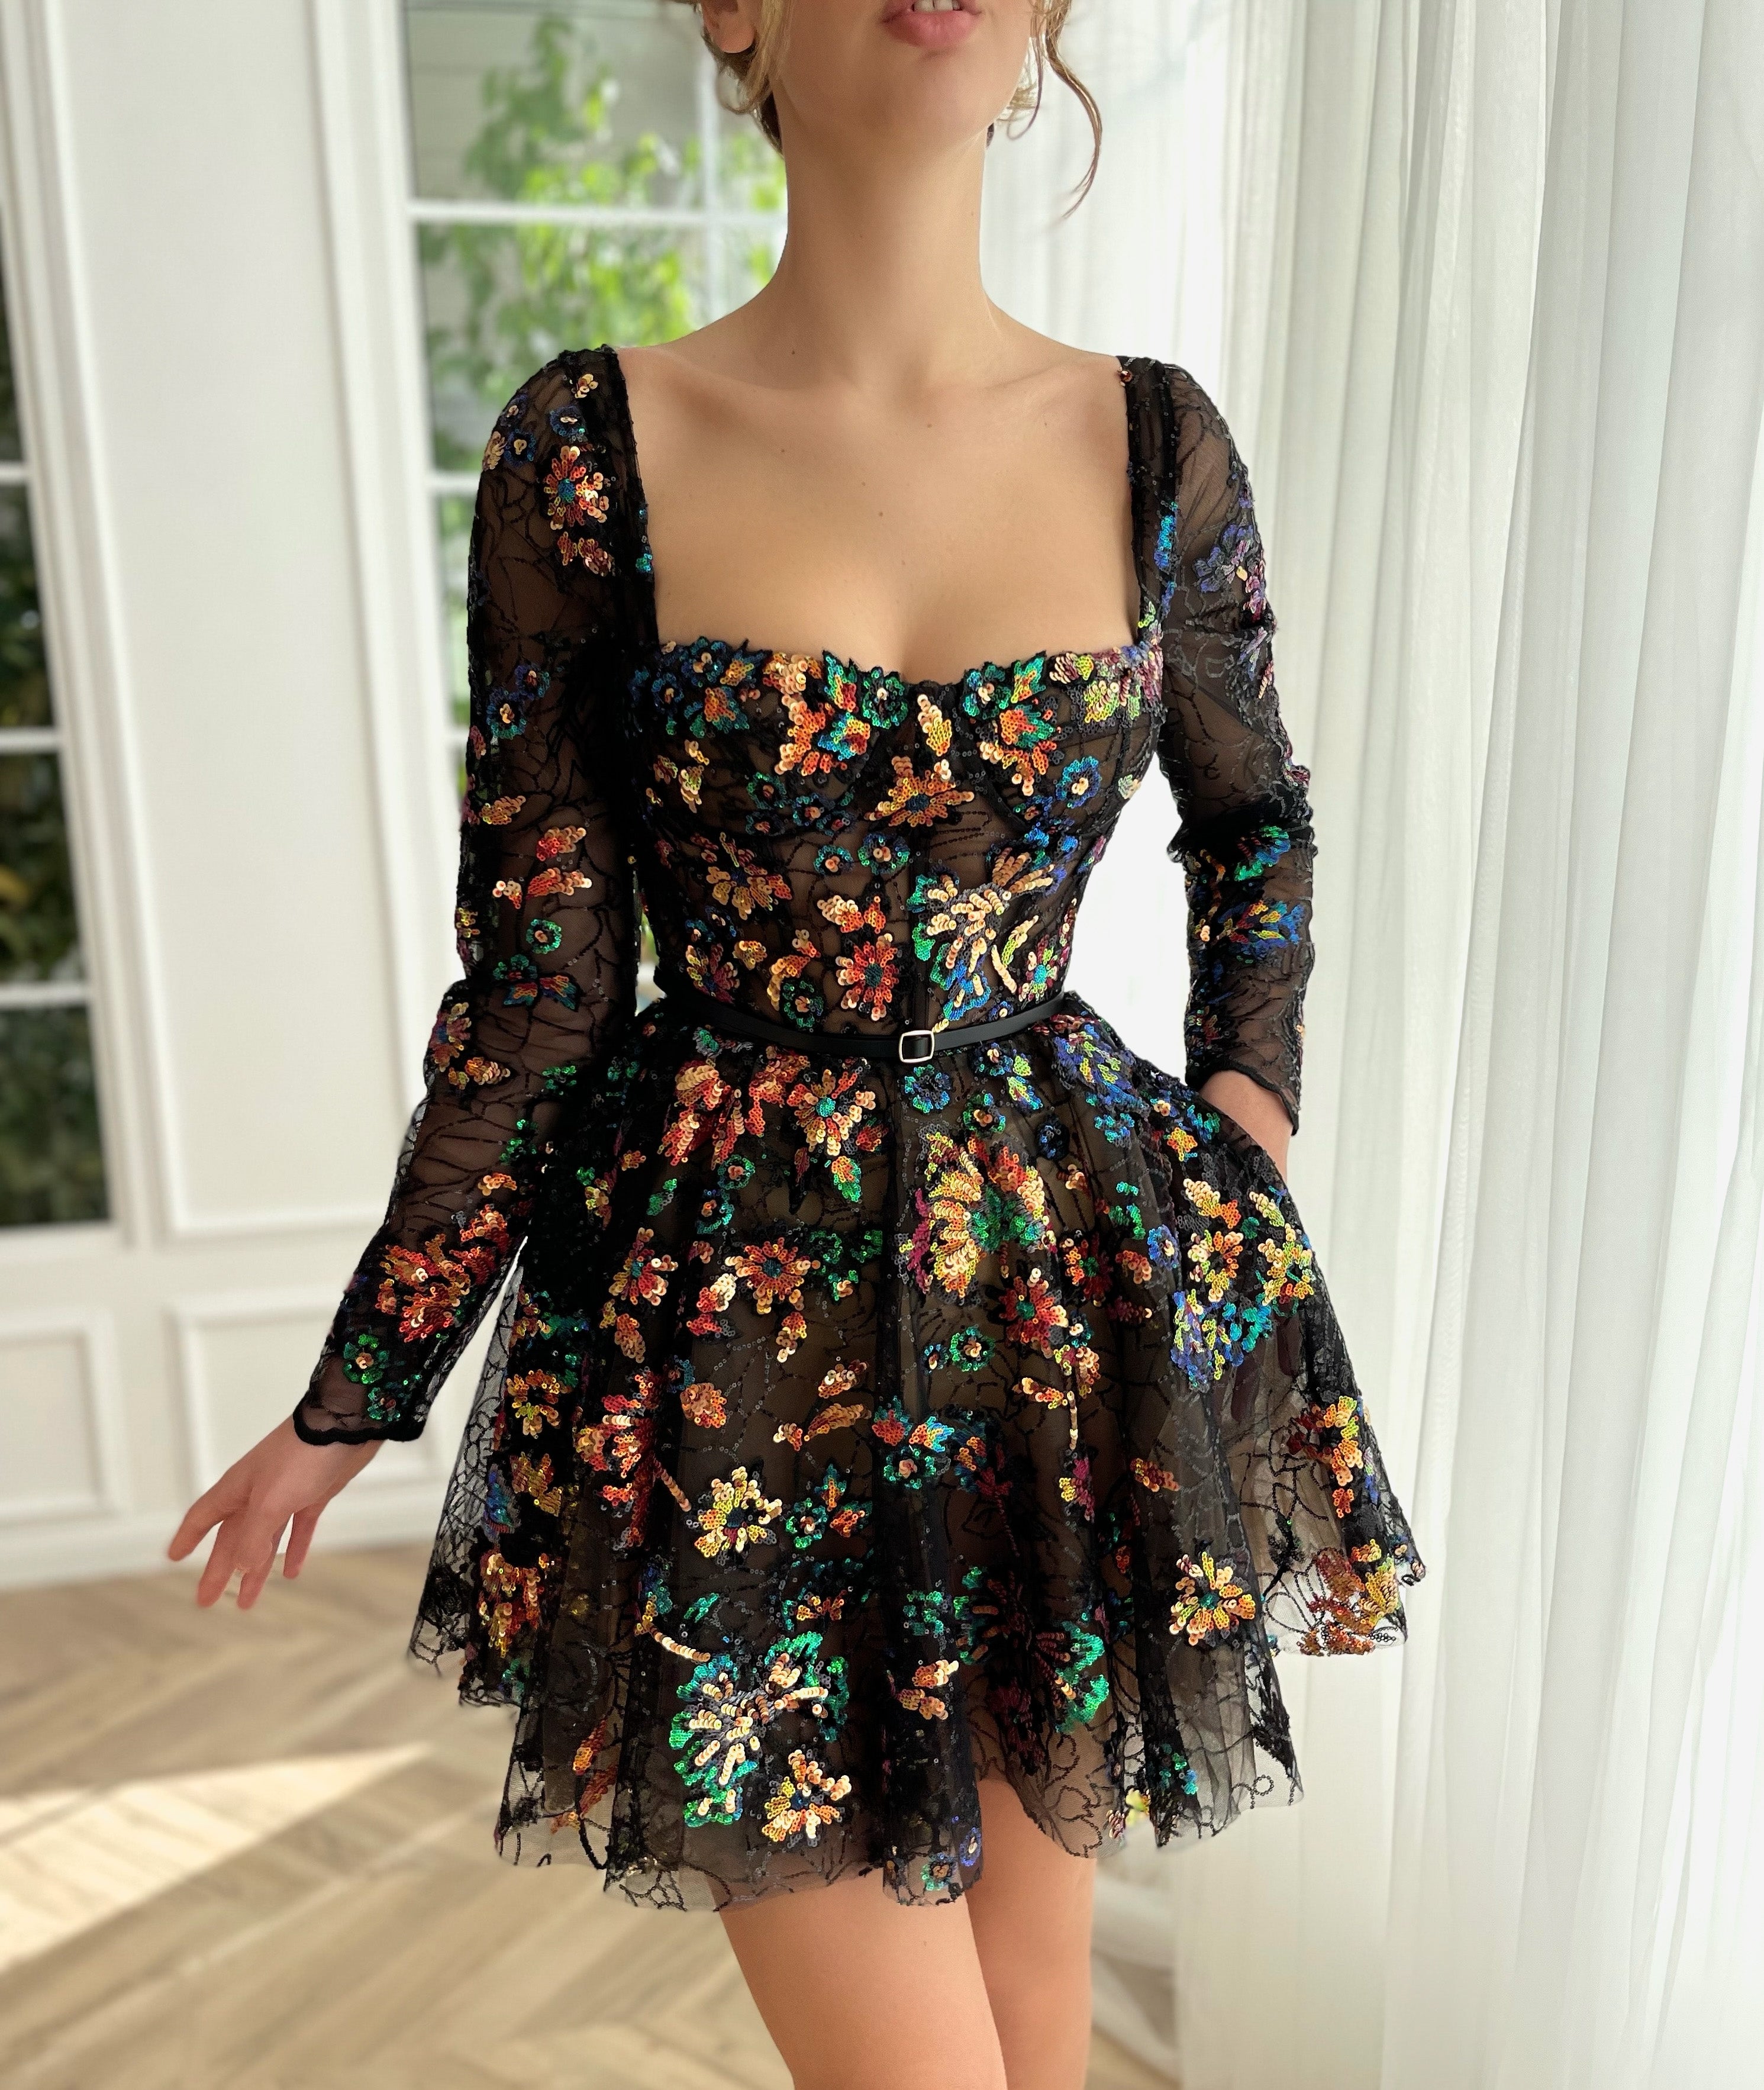 black dress with flowers